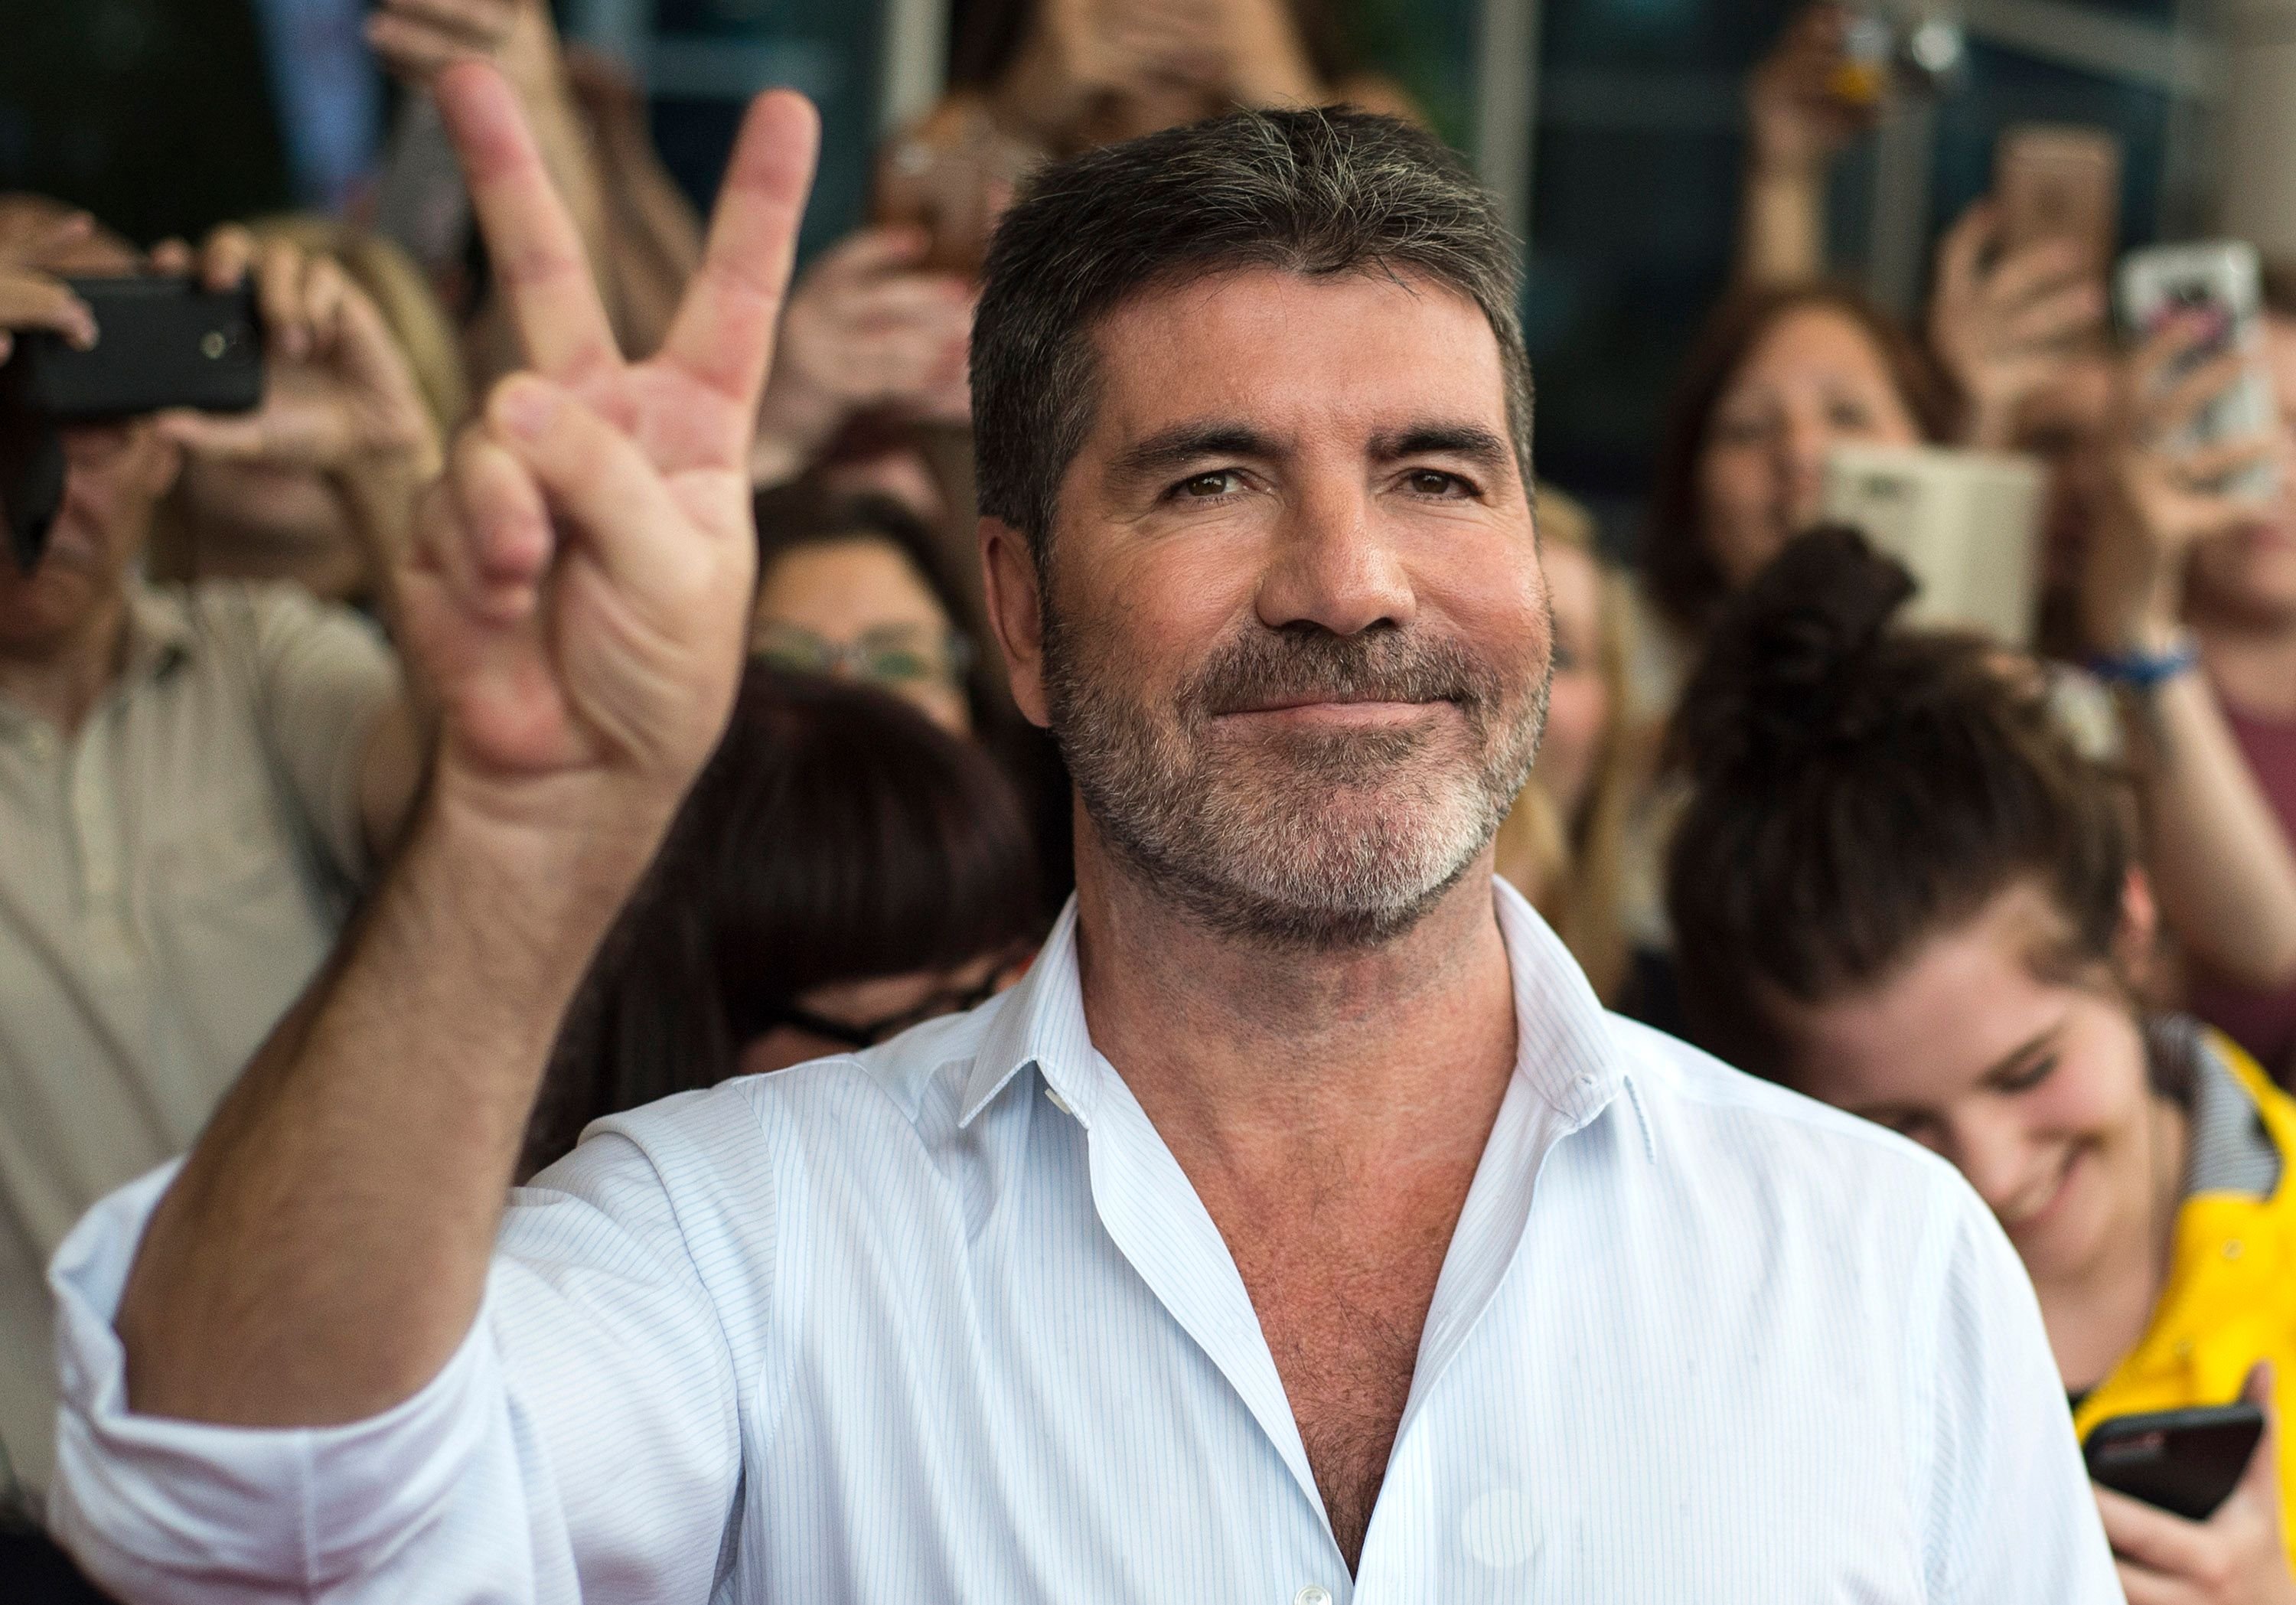 "America's Got Talent" judge and producer Simon Cowell in 2016 | Source: Getty Images